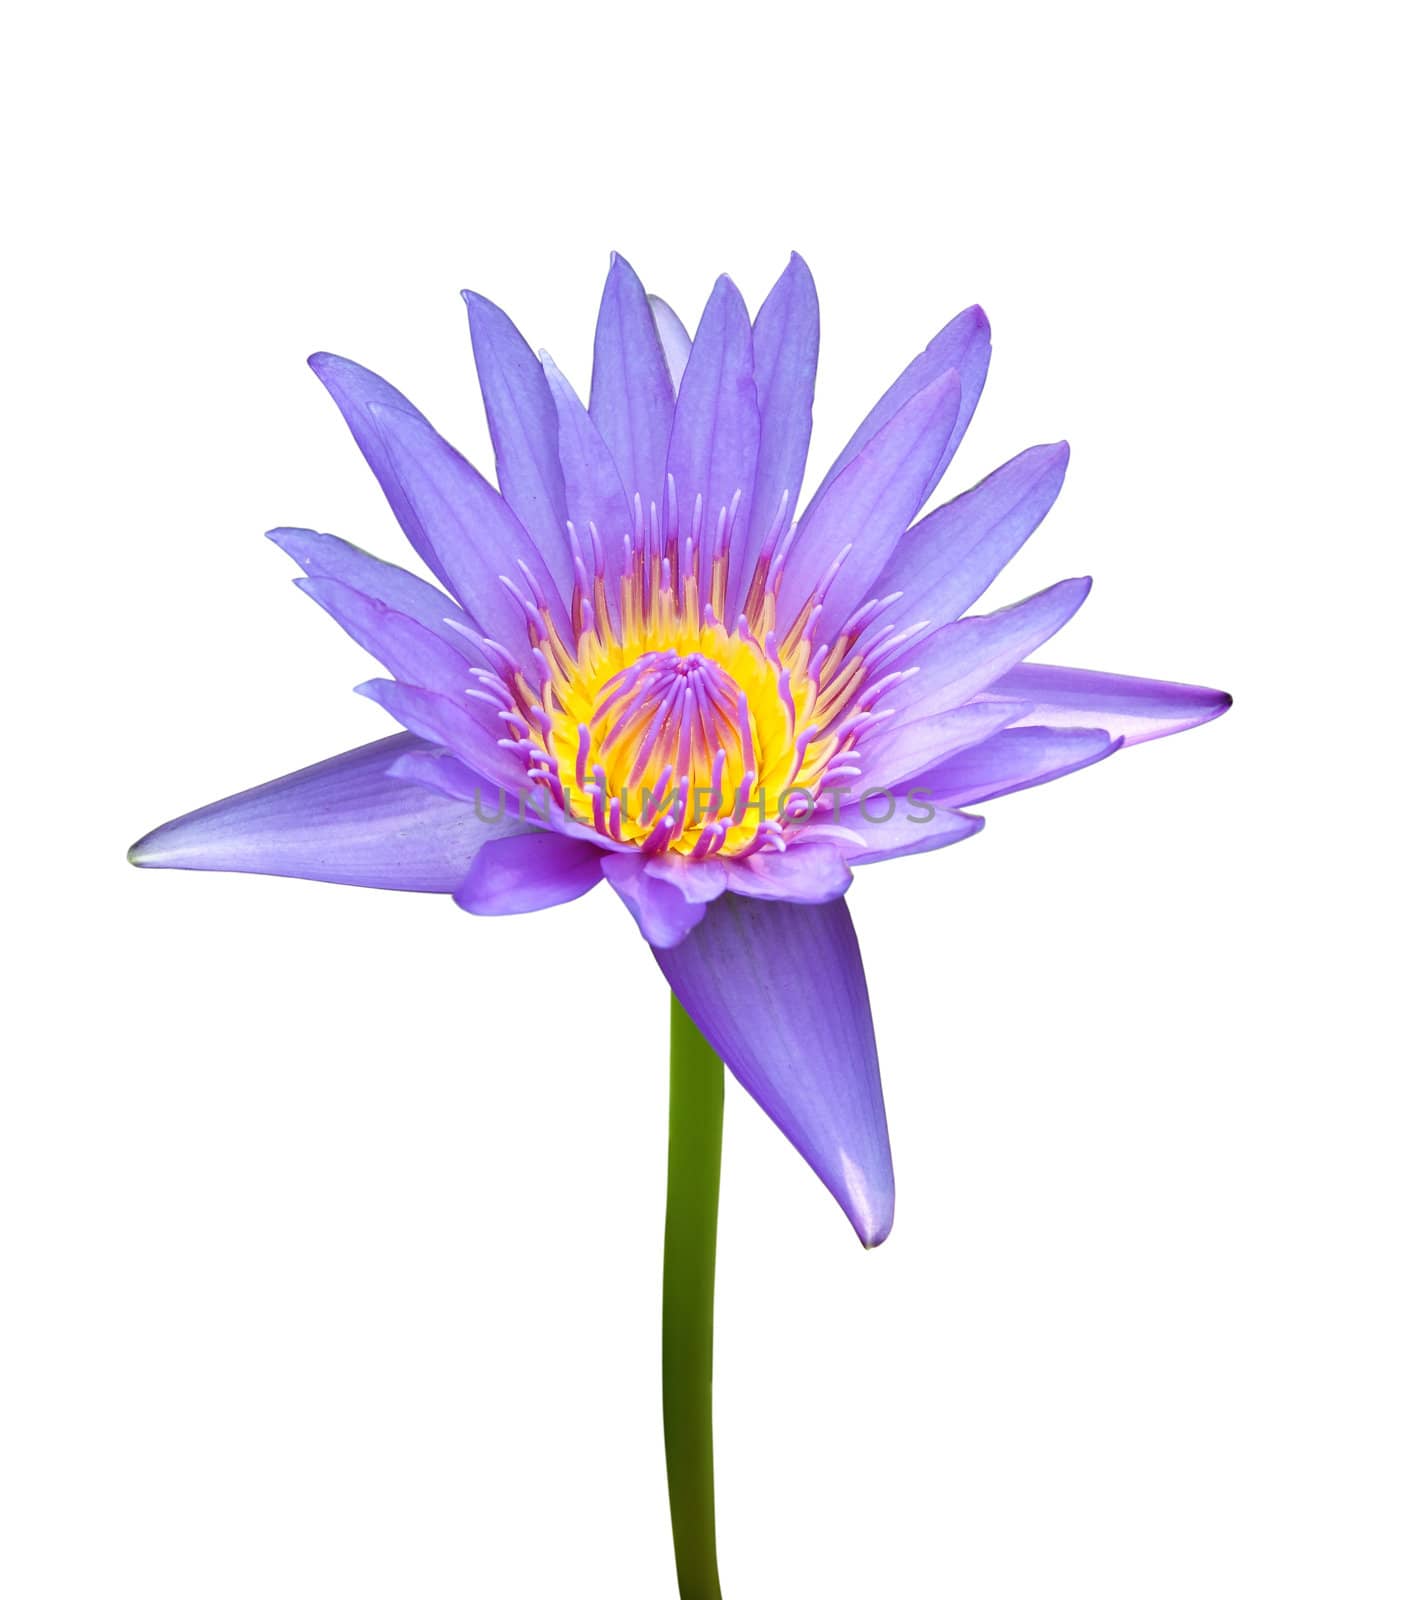 The blooming blue lotus on white background